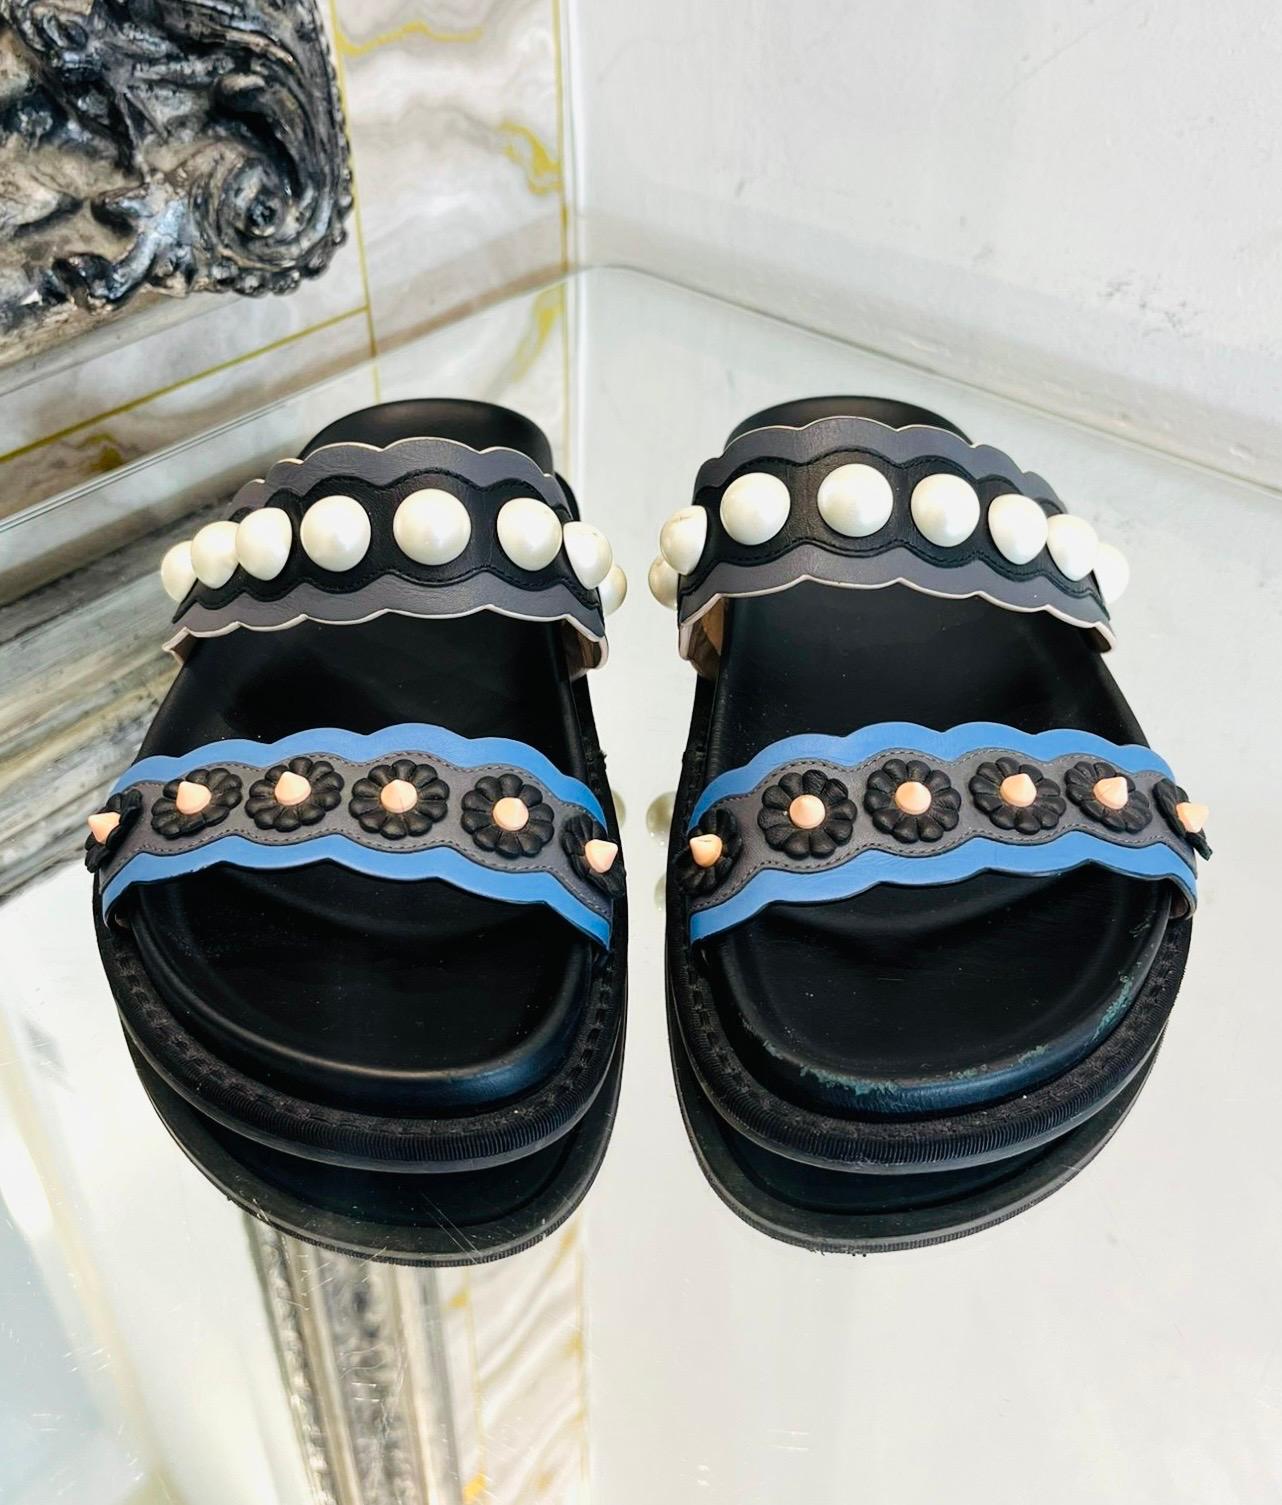 Fendi Pearl Embellished Leather Slides

Black slides designed with wide dual strap in blue and grey, detailed with white faux pearls and flowers motifs.

Featuring sturdy outsoles and open toes. 

Size – 36

Condition – Fair/Good (Signs of wear to